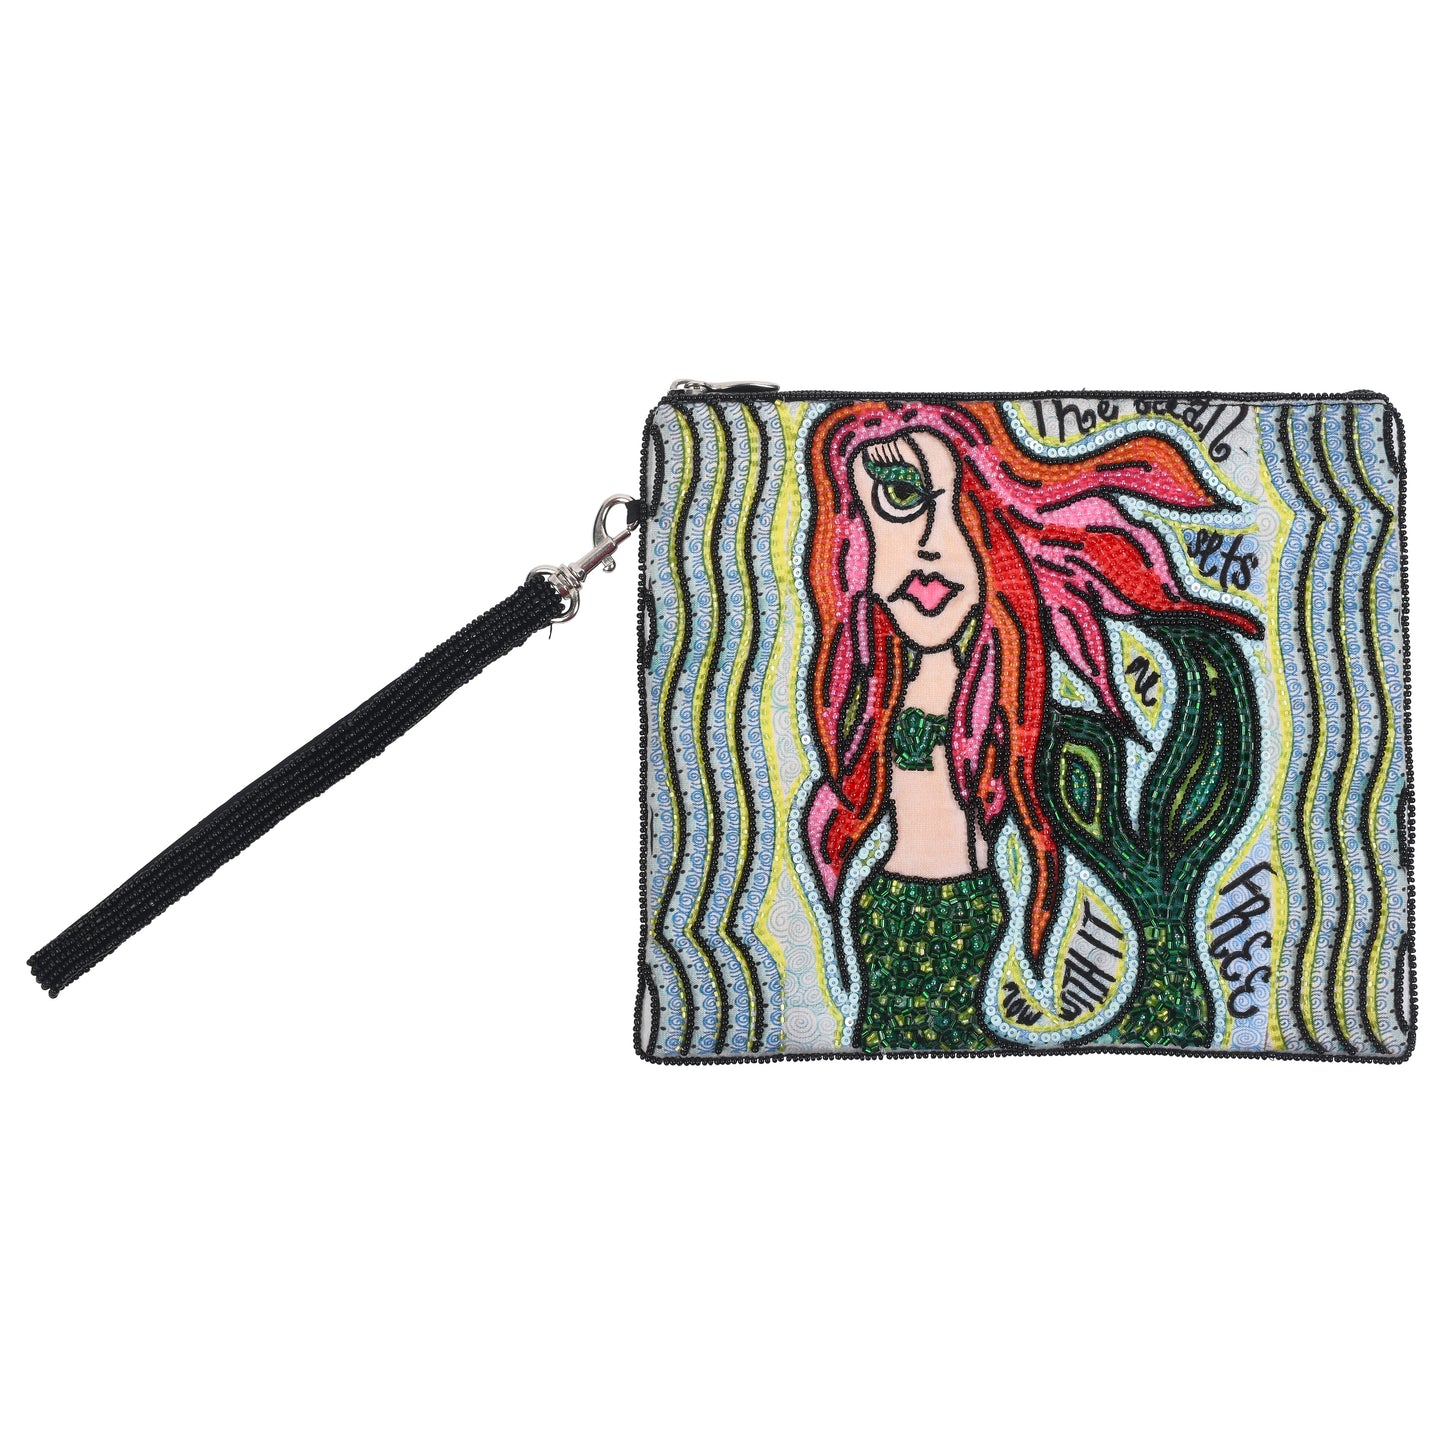 Free Flow Square Clutch by Sarah Walters